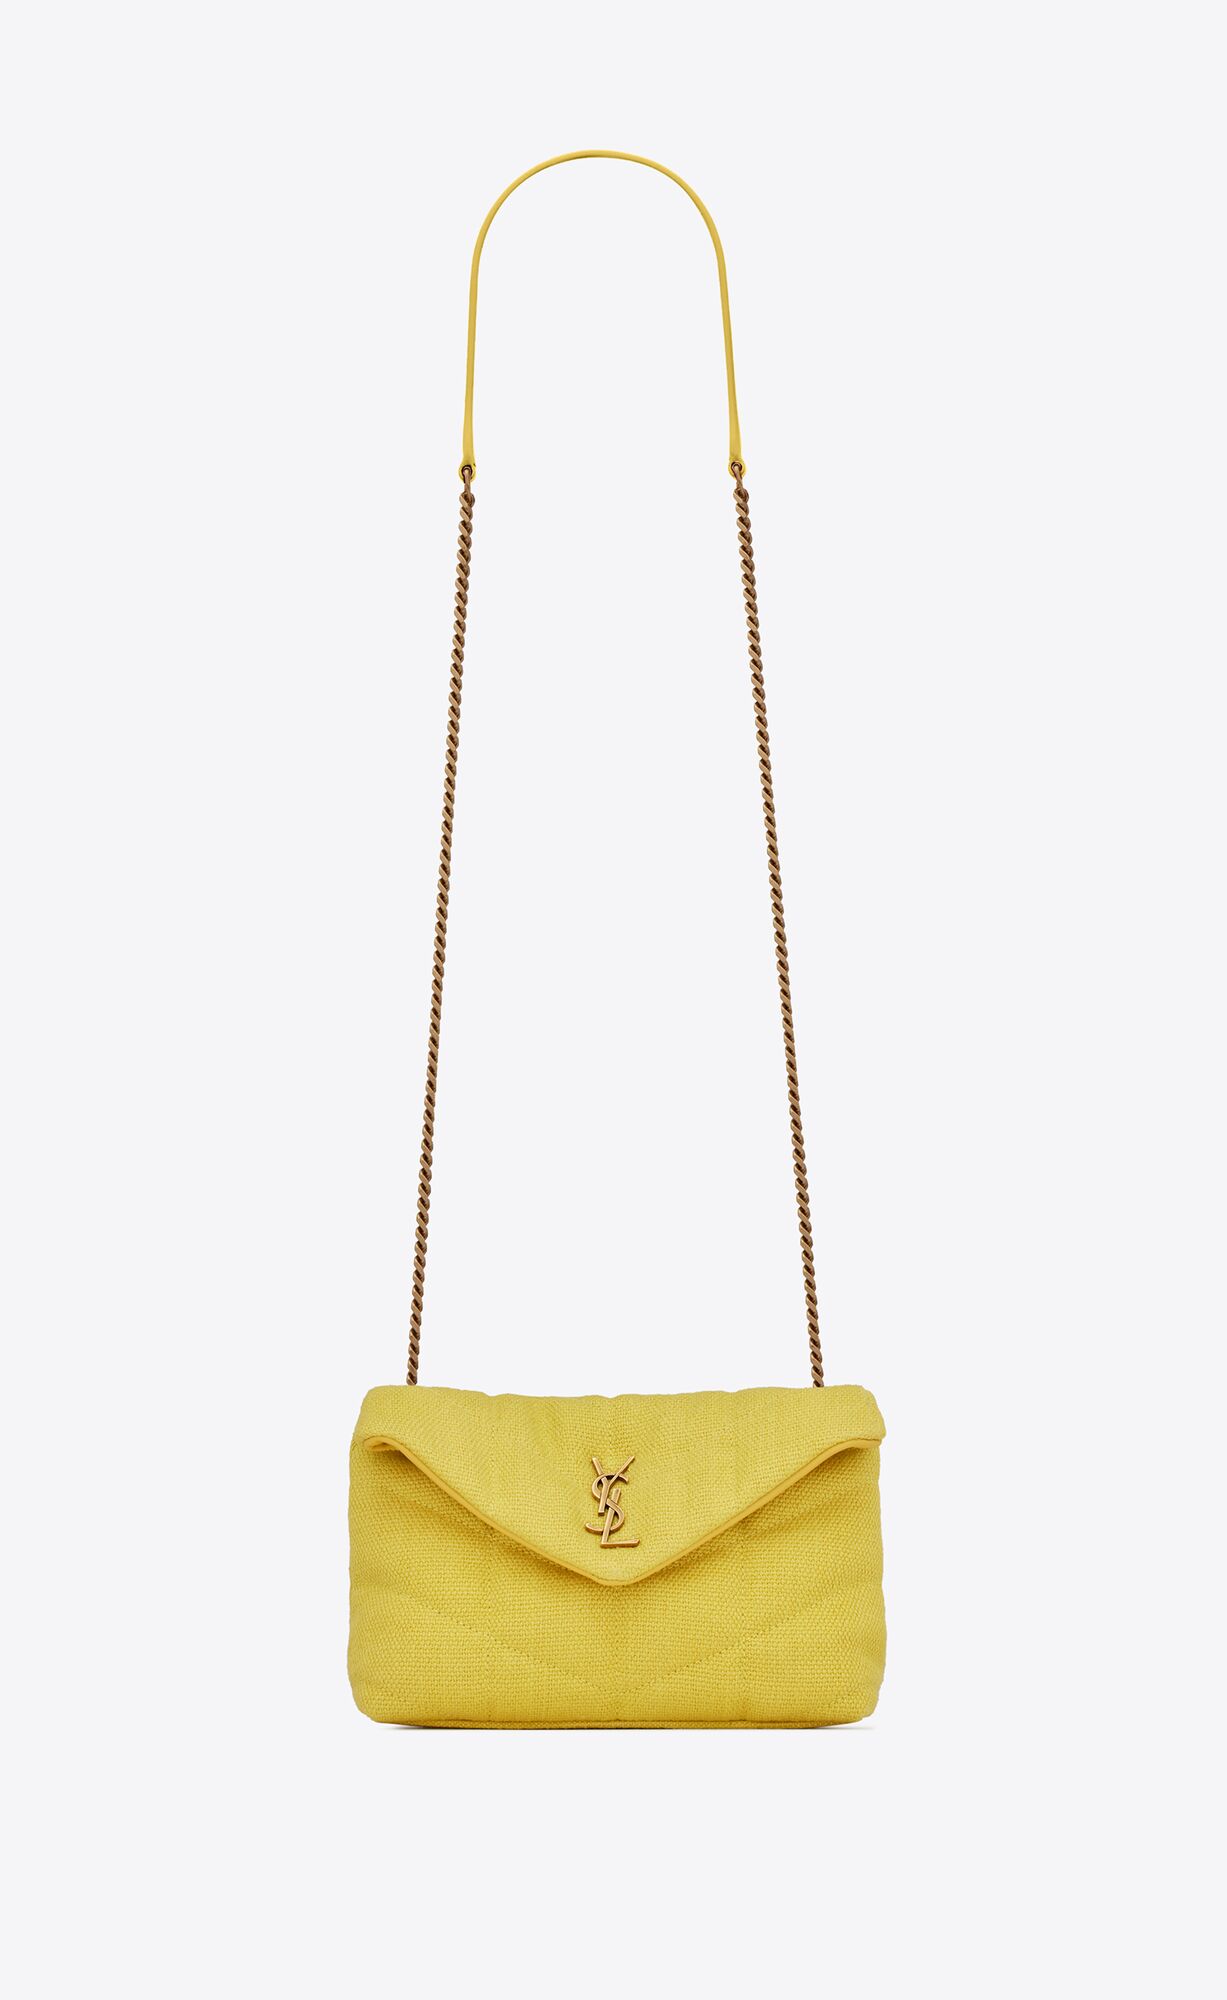 Saint Laurent Puffer Toy Bag In Canvas And Smooth Leather – Jaune Citron – 620333FAACV7215